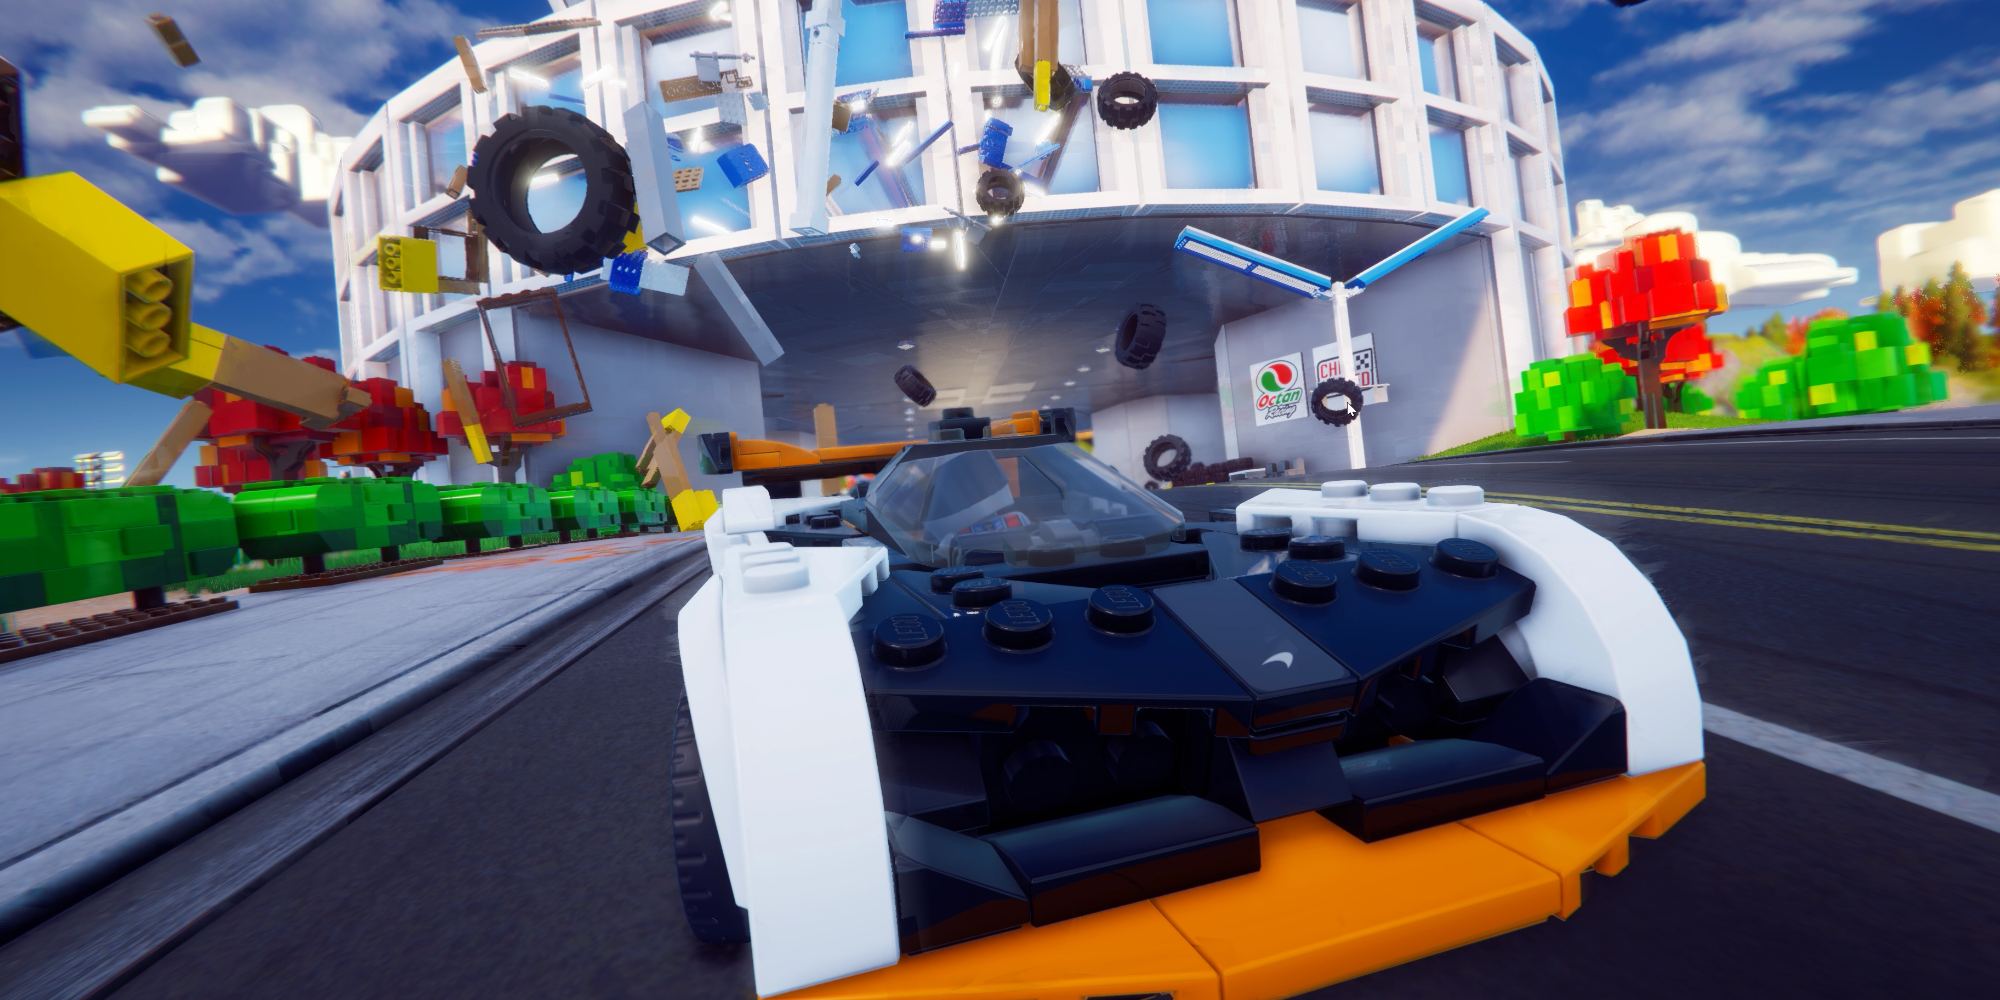 LEGO 2K Drive lands as the latest racer game on PS5 and Switch